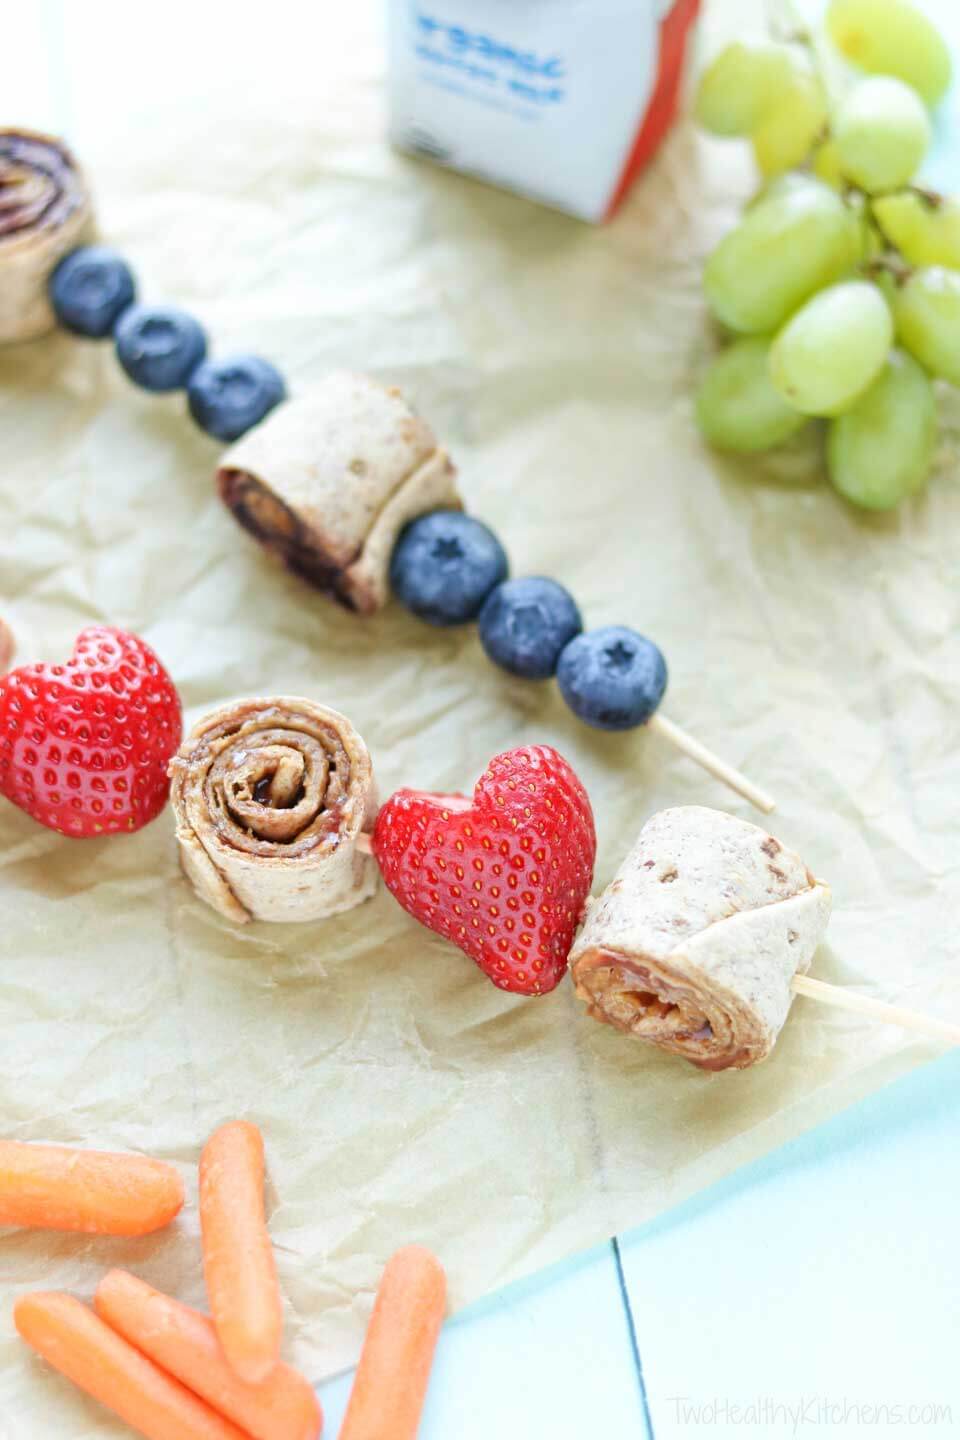 Sandwich kabobs with blueberries, strawberries and grapes